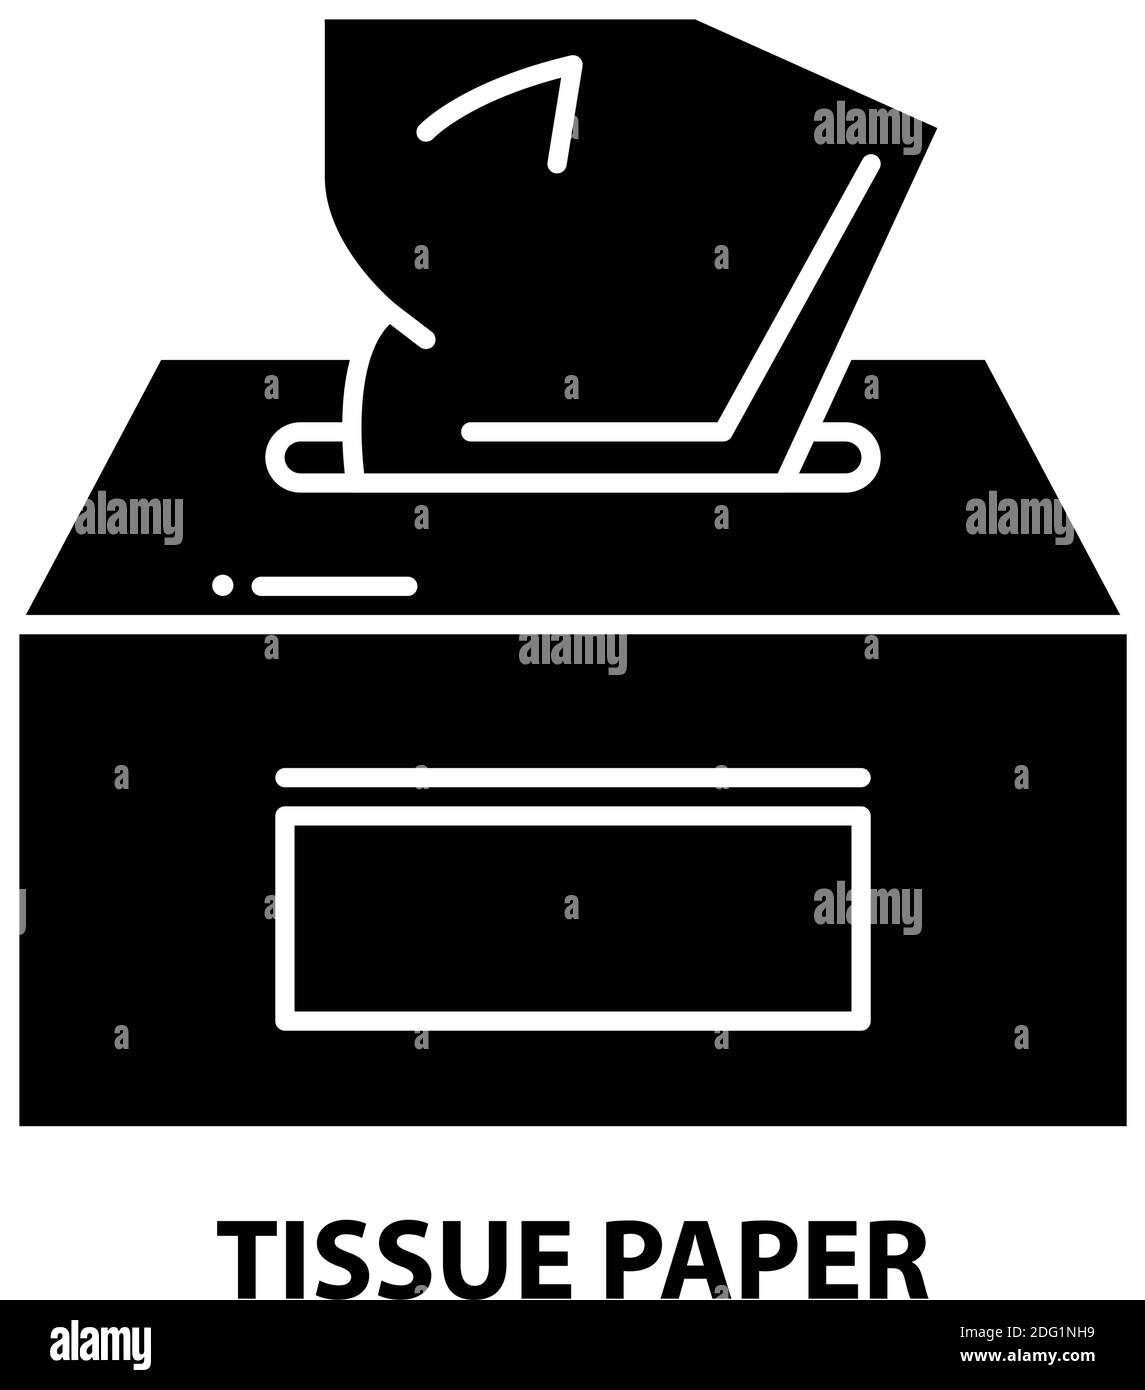 tissue paper icon, black vector sign with editable strokes, concept illustration Stock Vector